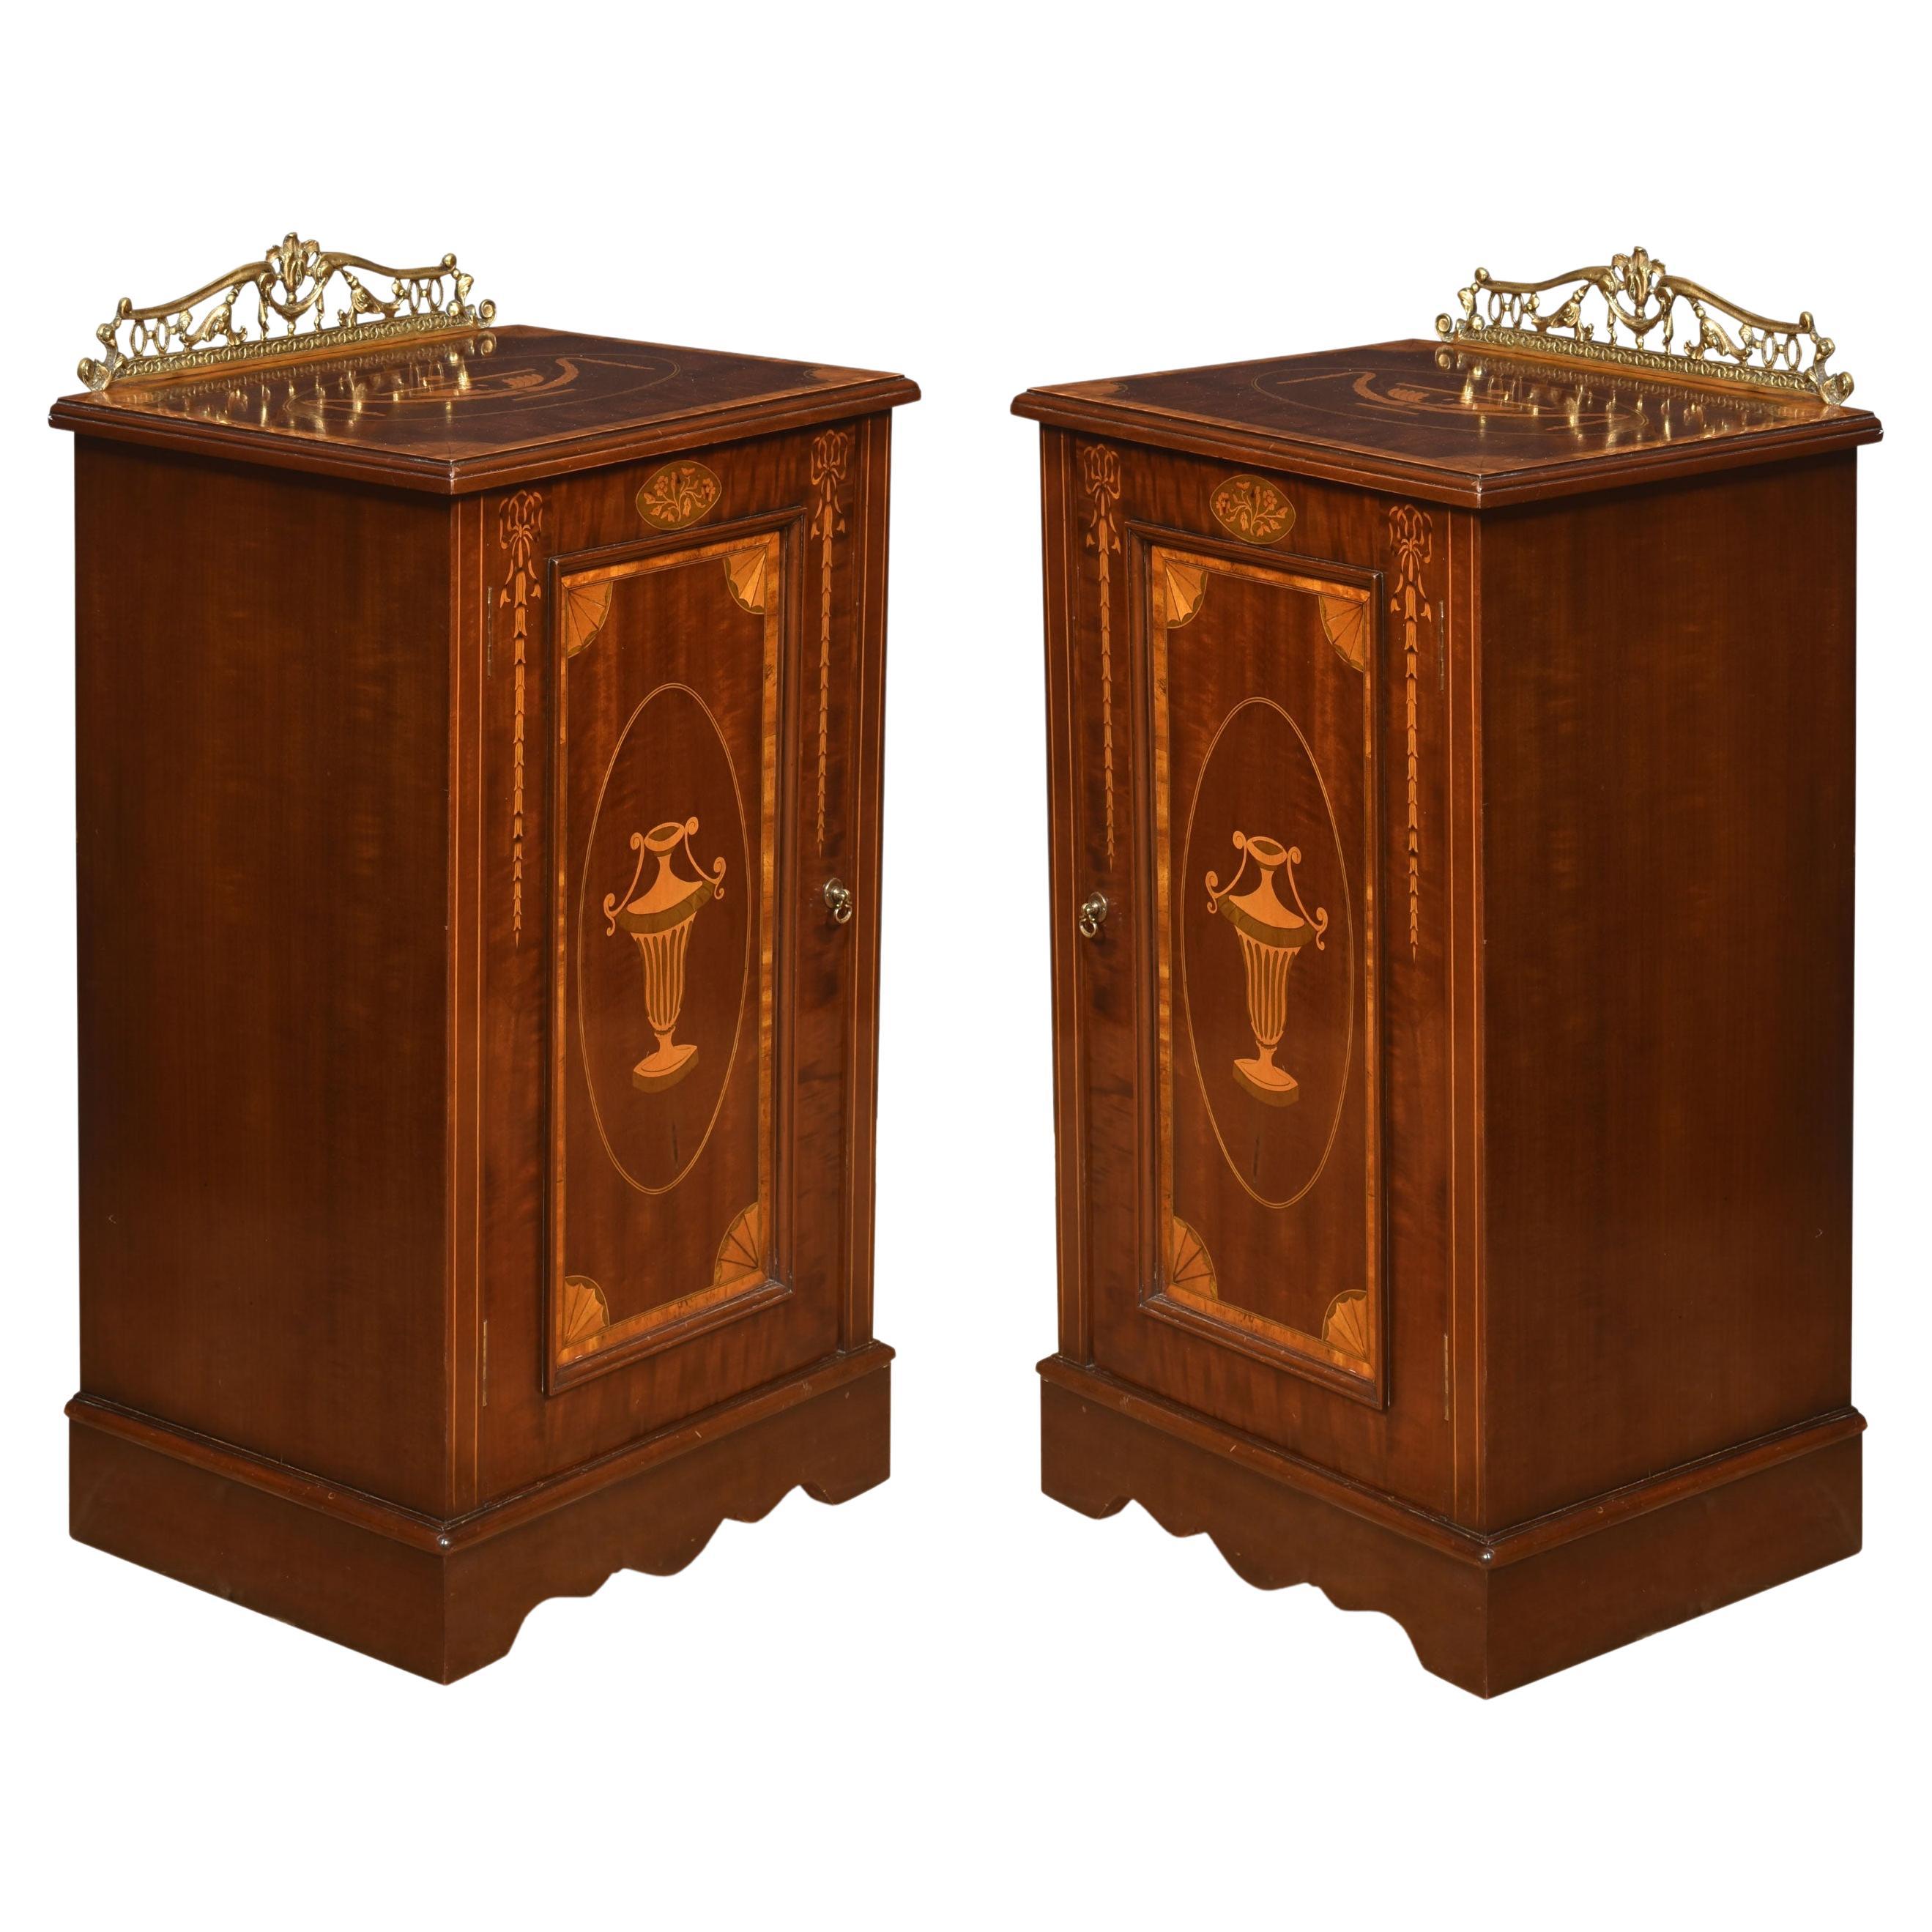 Pair of Inlaid bedside cabinets